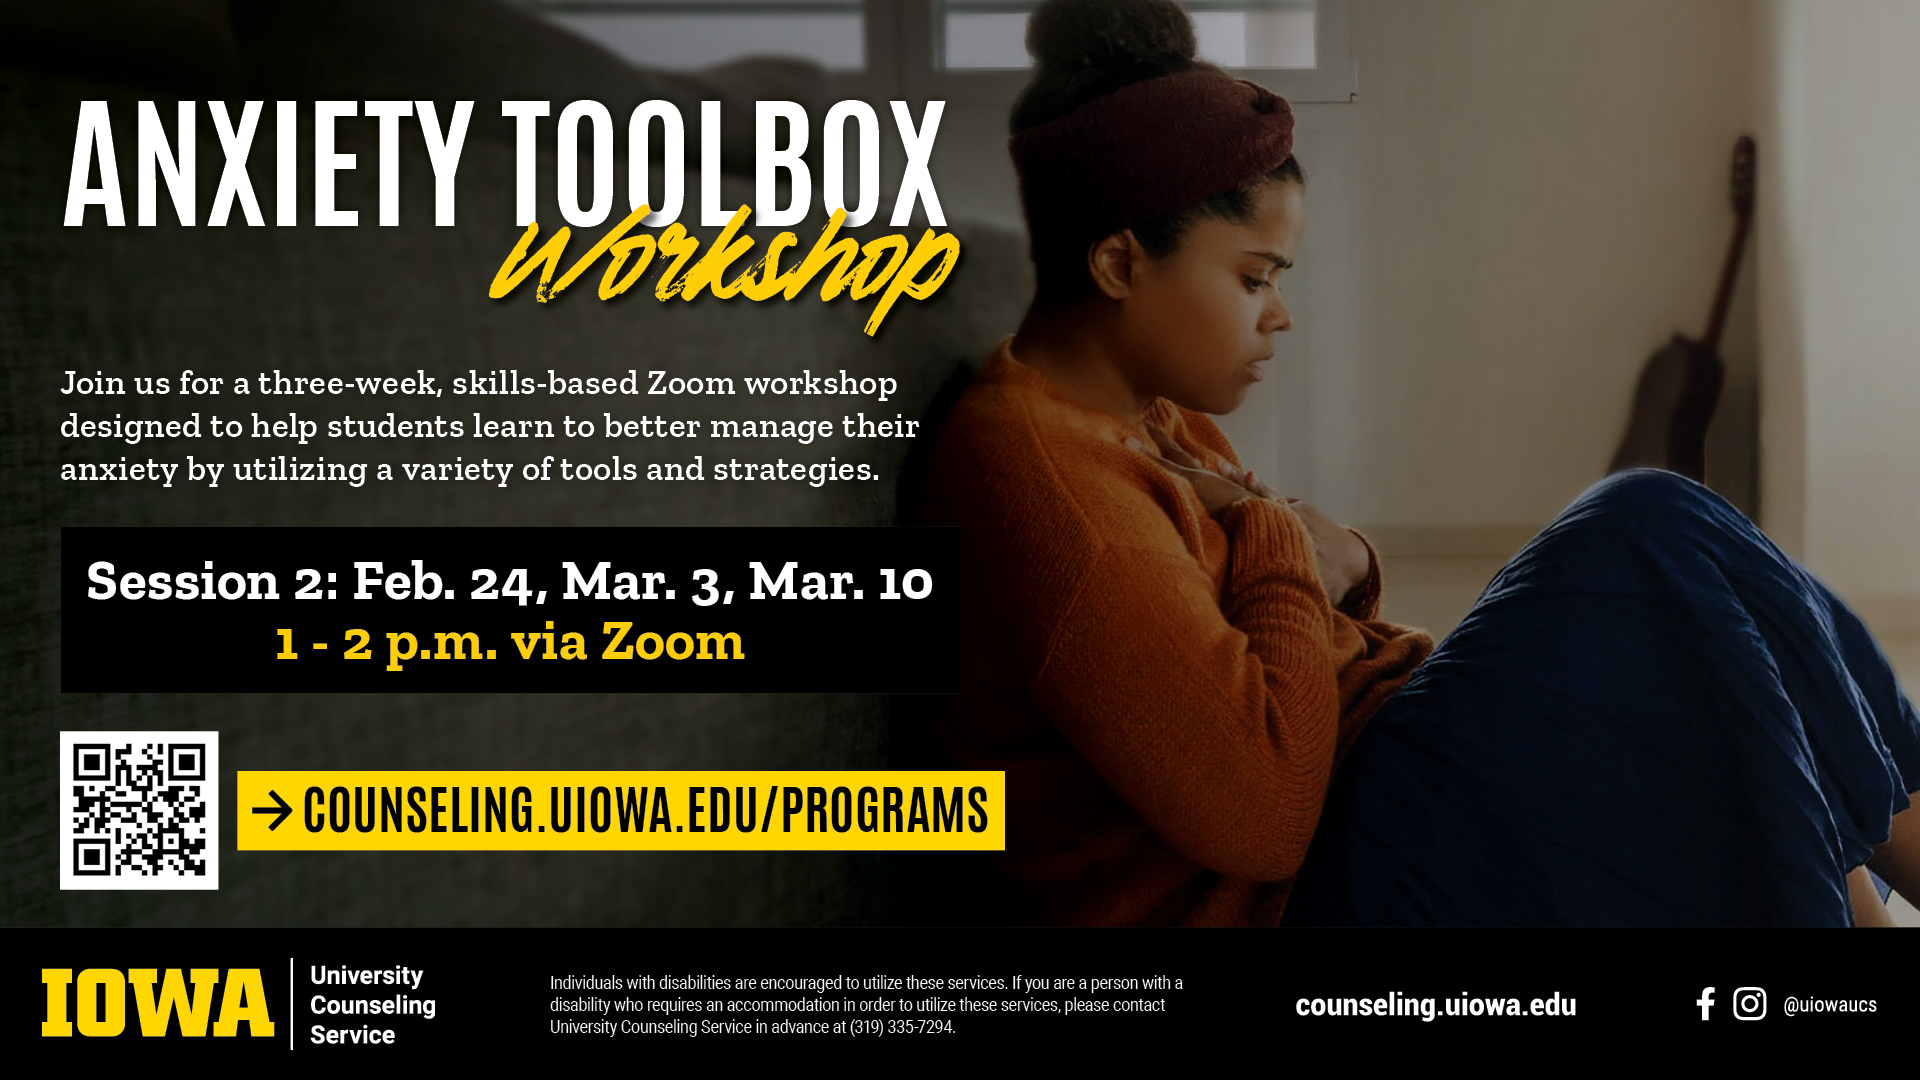 Anxiety Toolbox Workshop Session 1: Feb 24, march 3, March 10 1-2pm via zoom counseling.uiowa.edu/programs